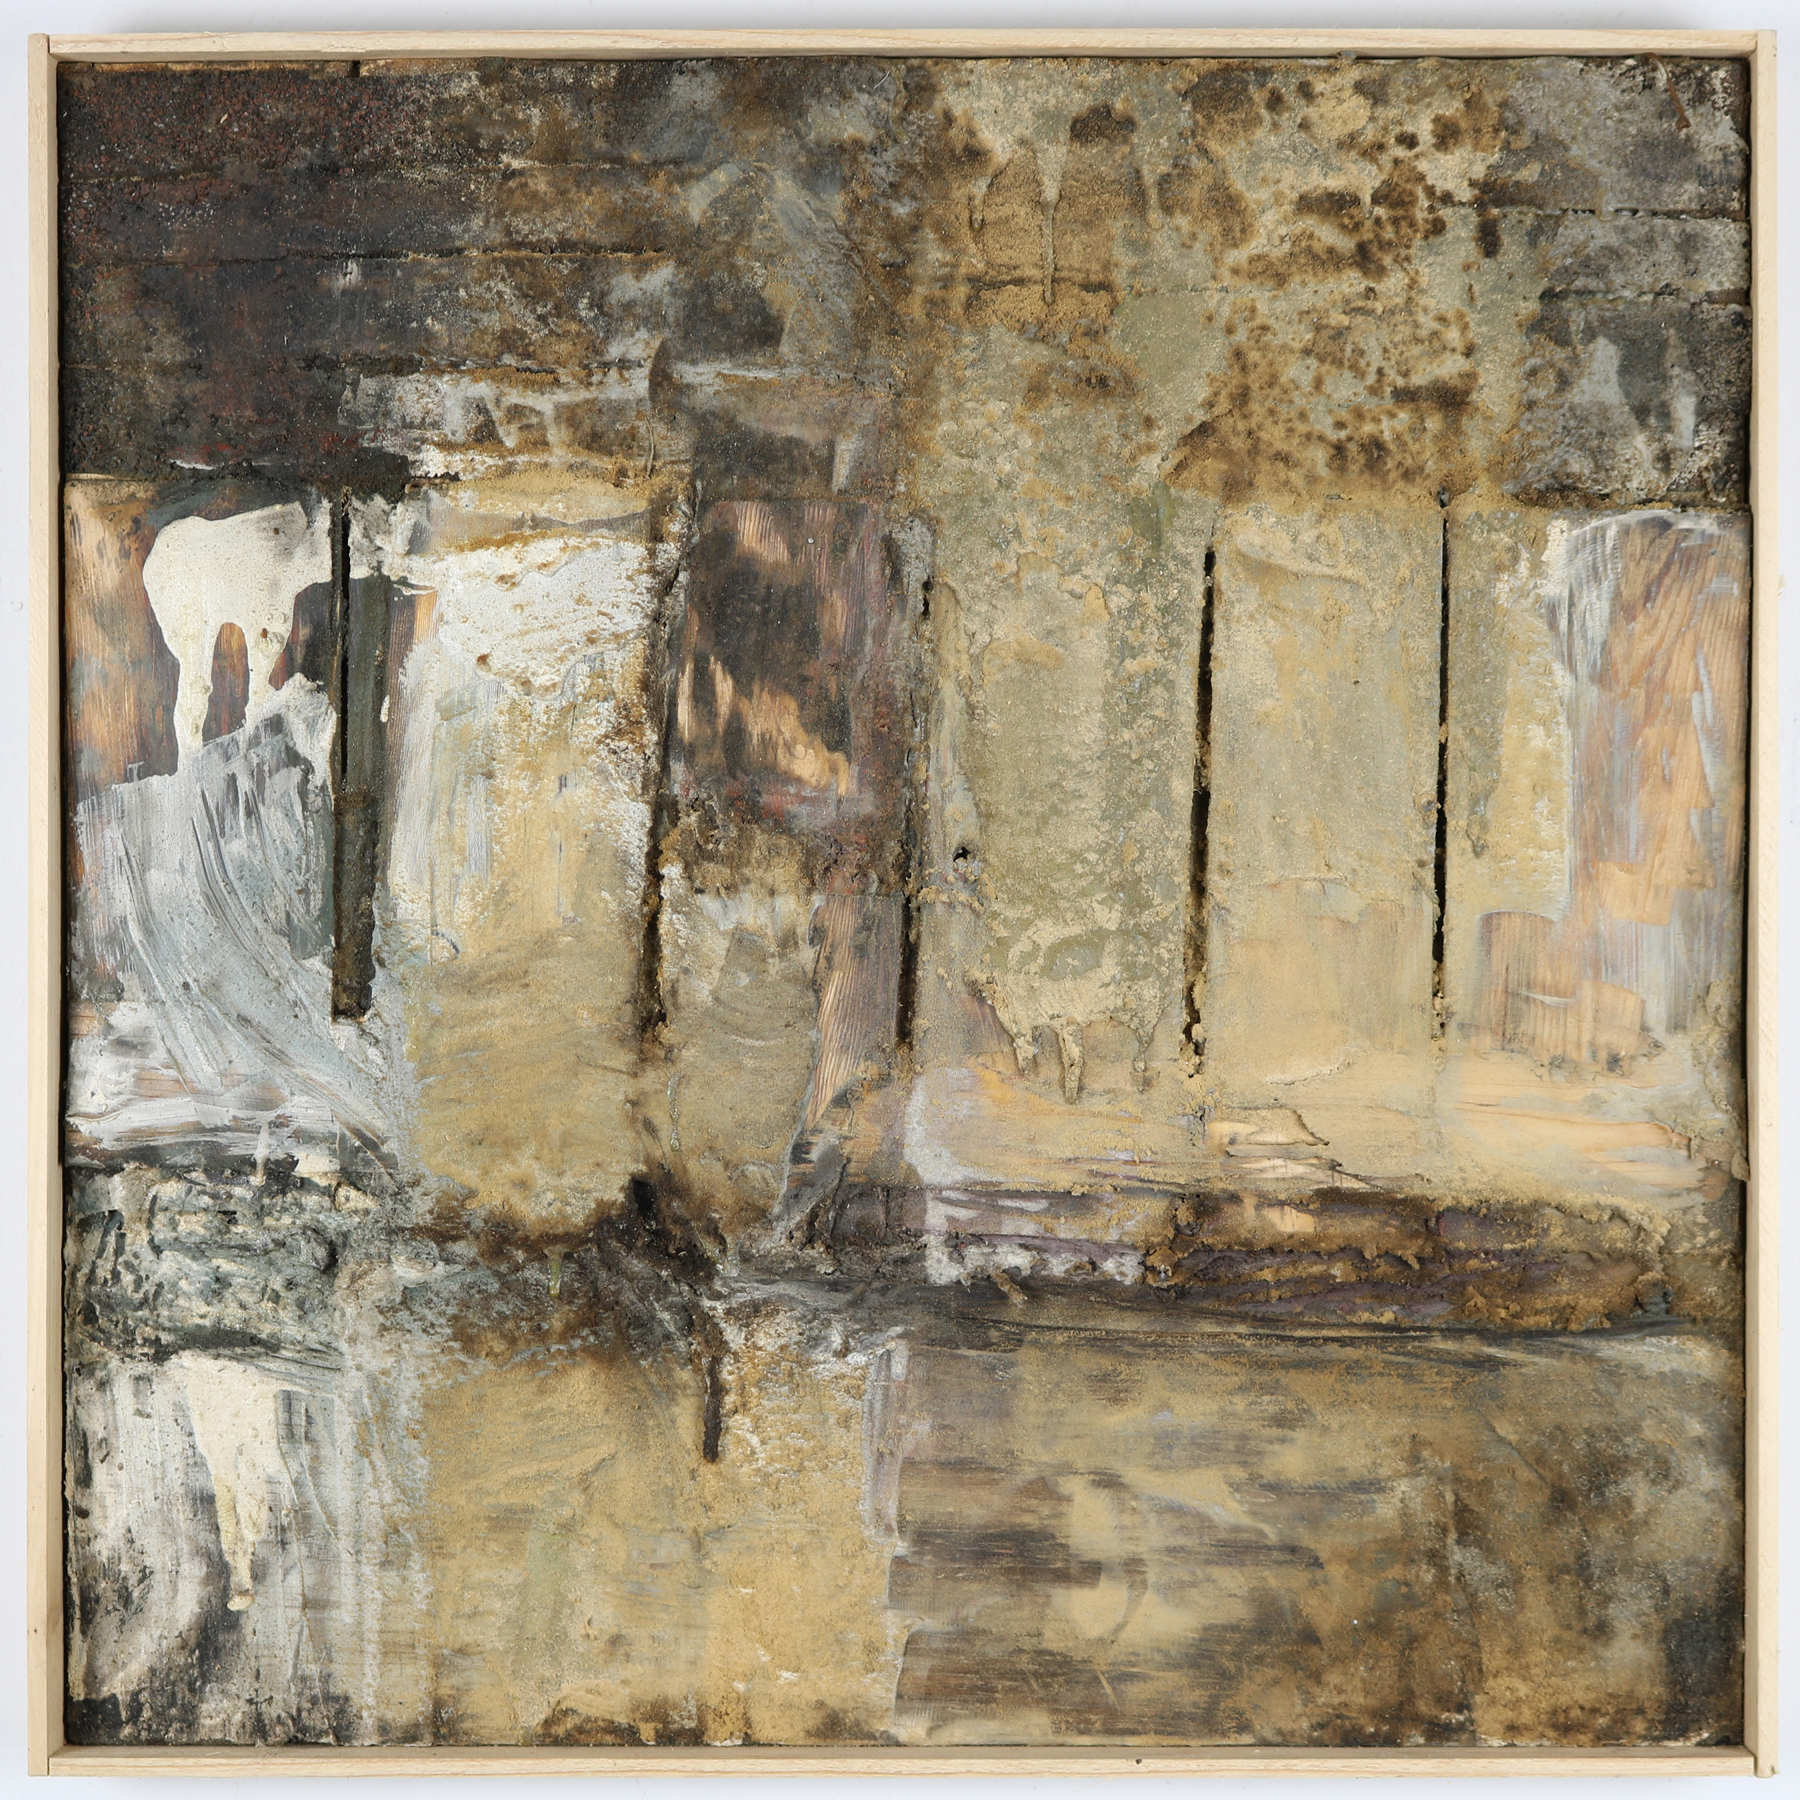  Leslie Zelamsky,  What Remains, &nbsp;Mixed media, 24x24 